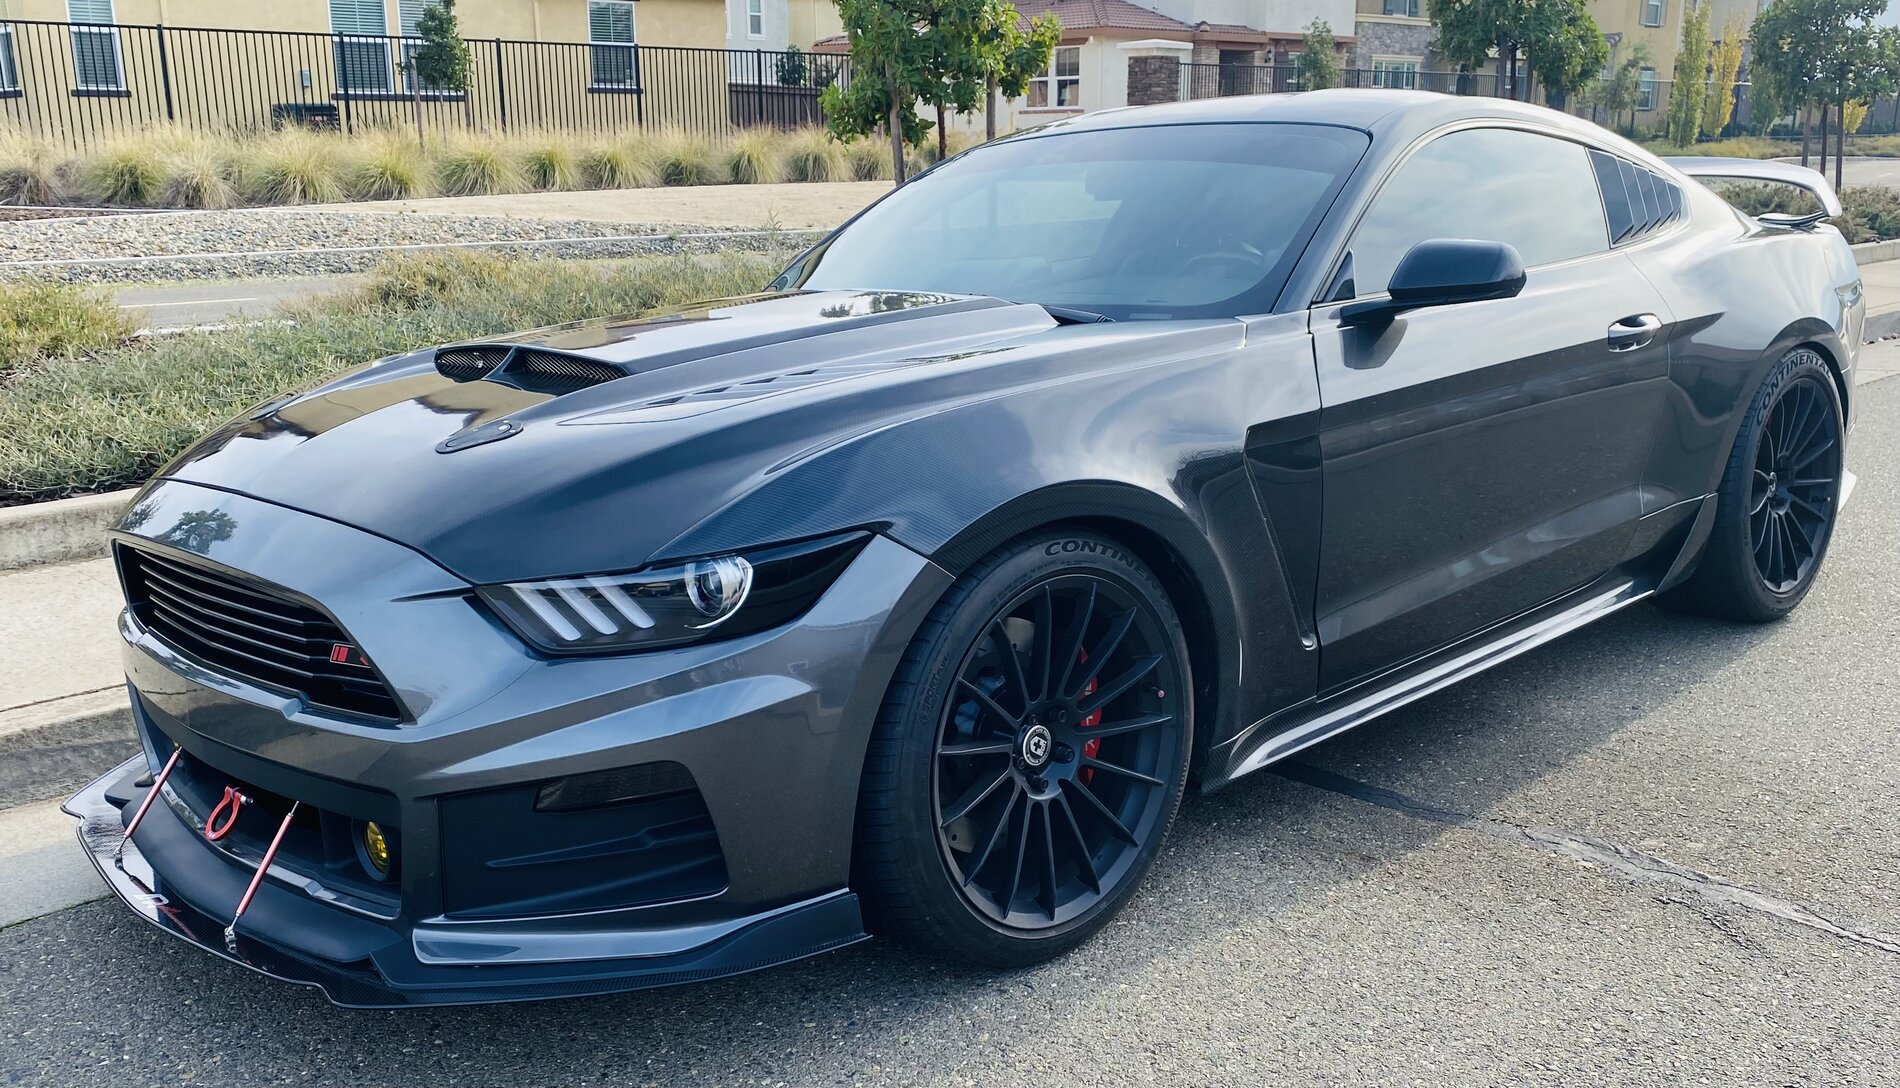 California - 2017 Ford Mustang GT 5.0 Base Non-Performance Roush